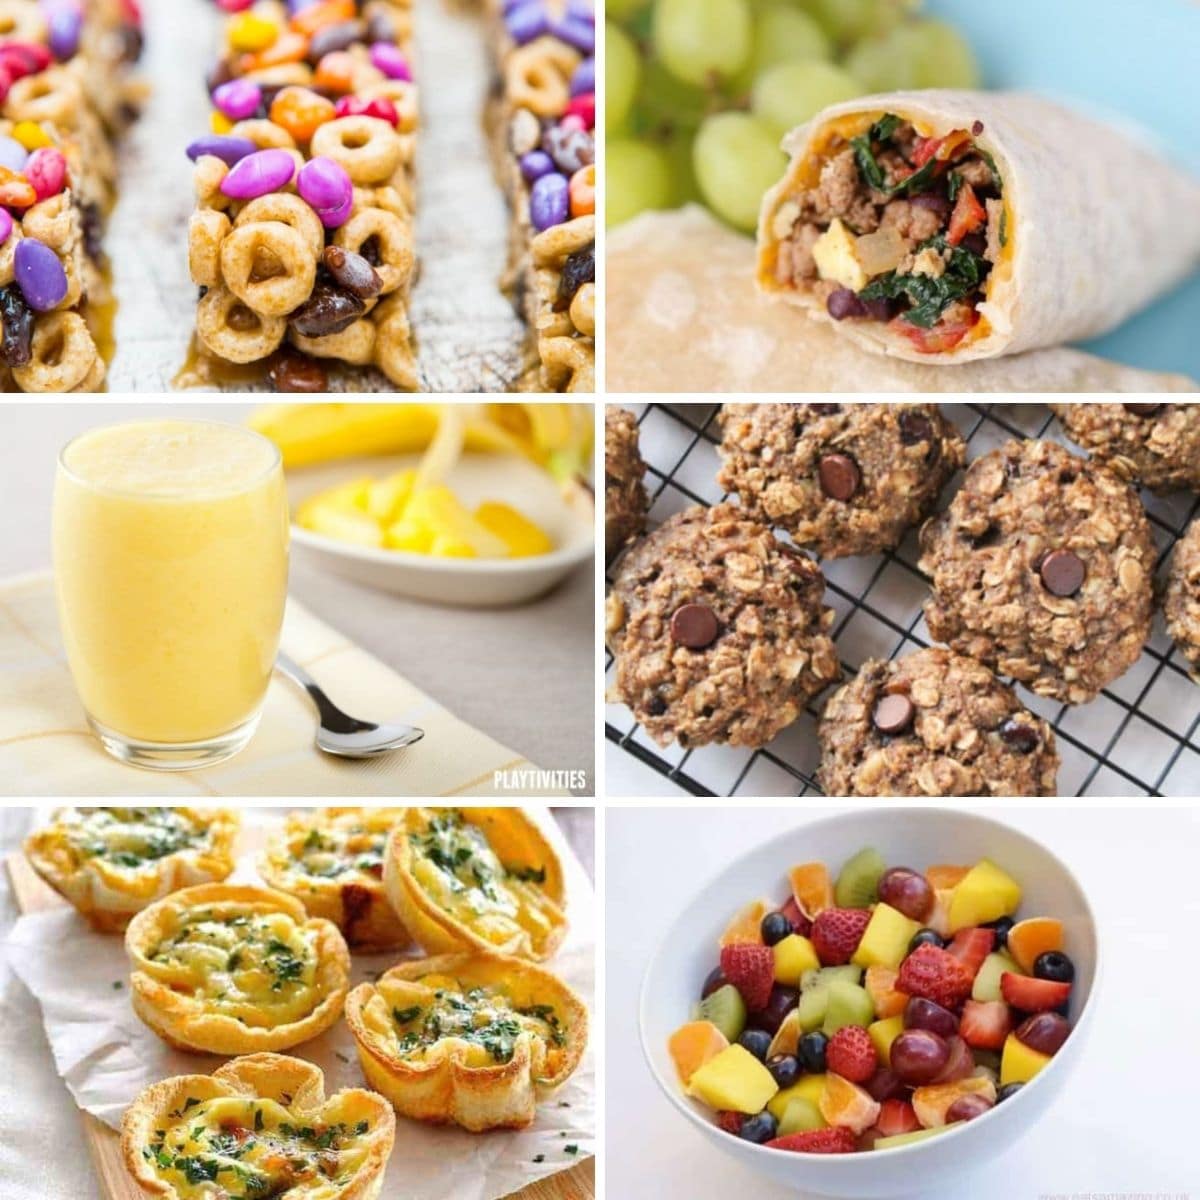 35 Easy and Healthy Breakfast Recipes for Kids - Playtivities